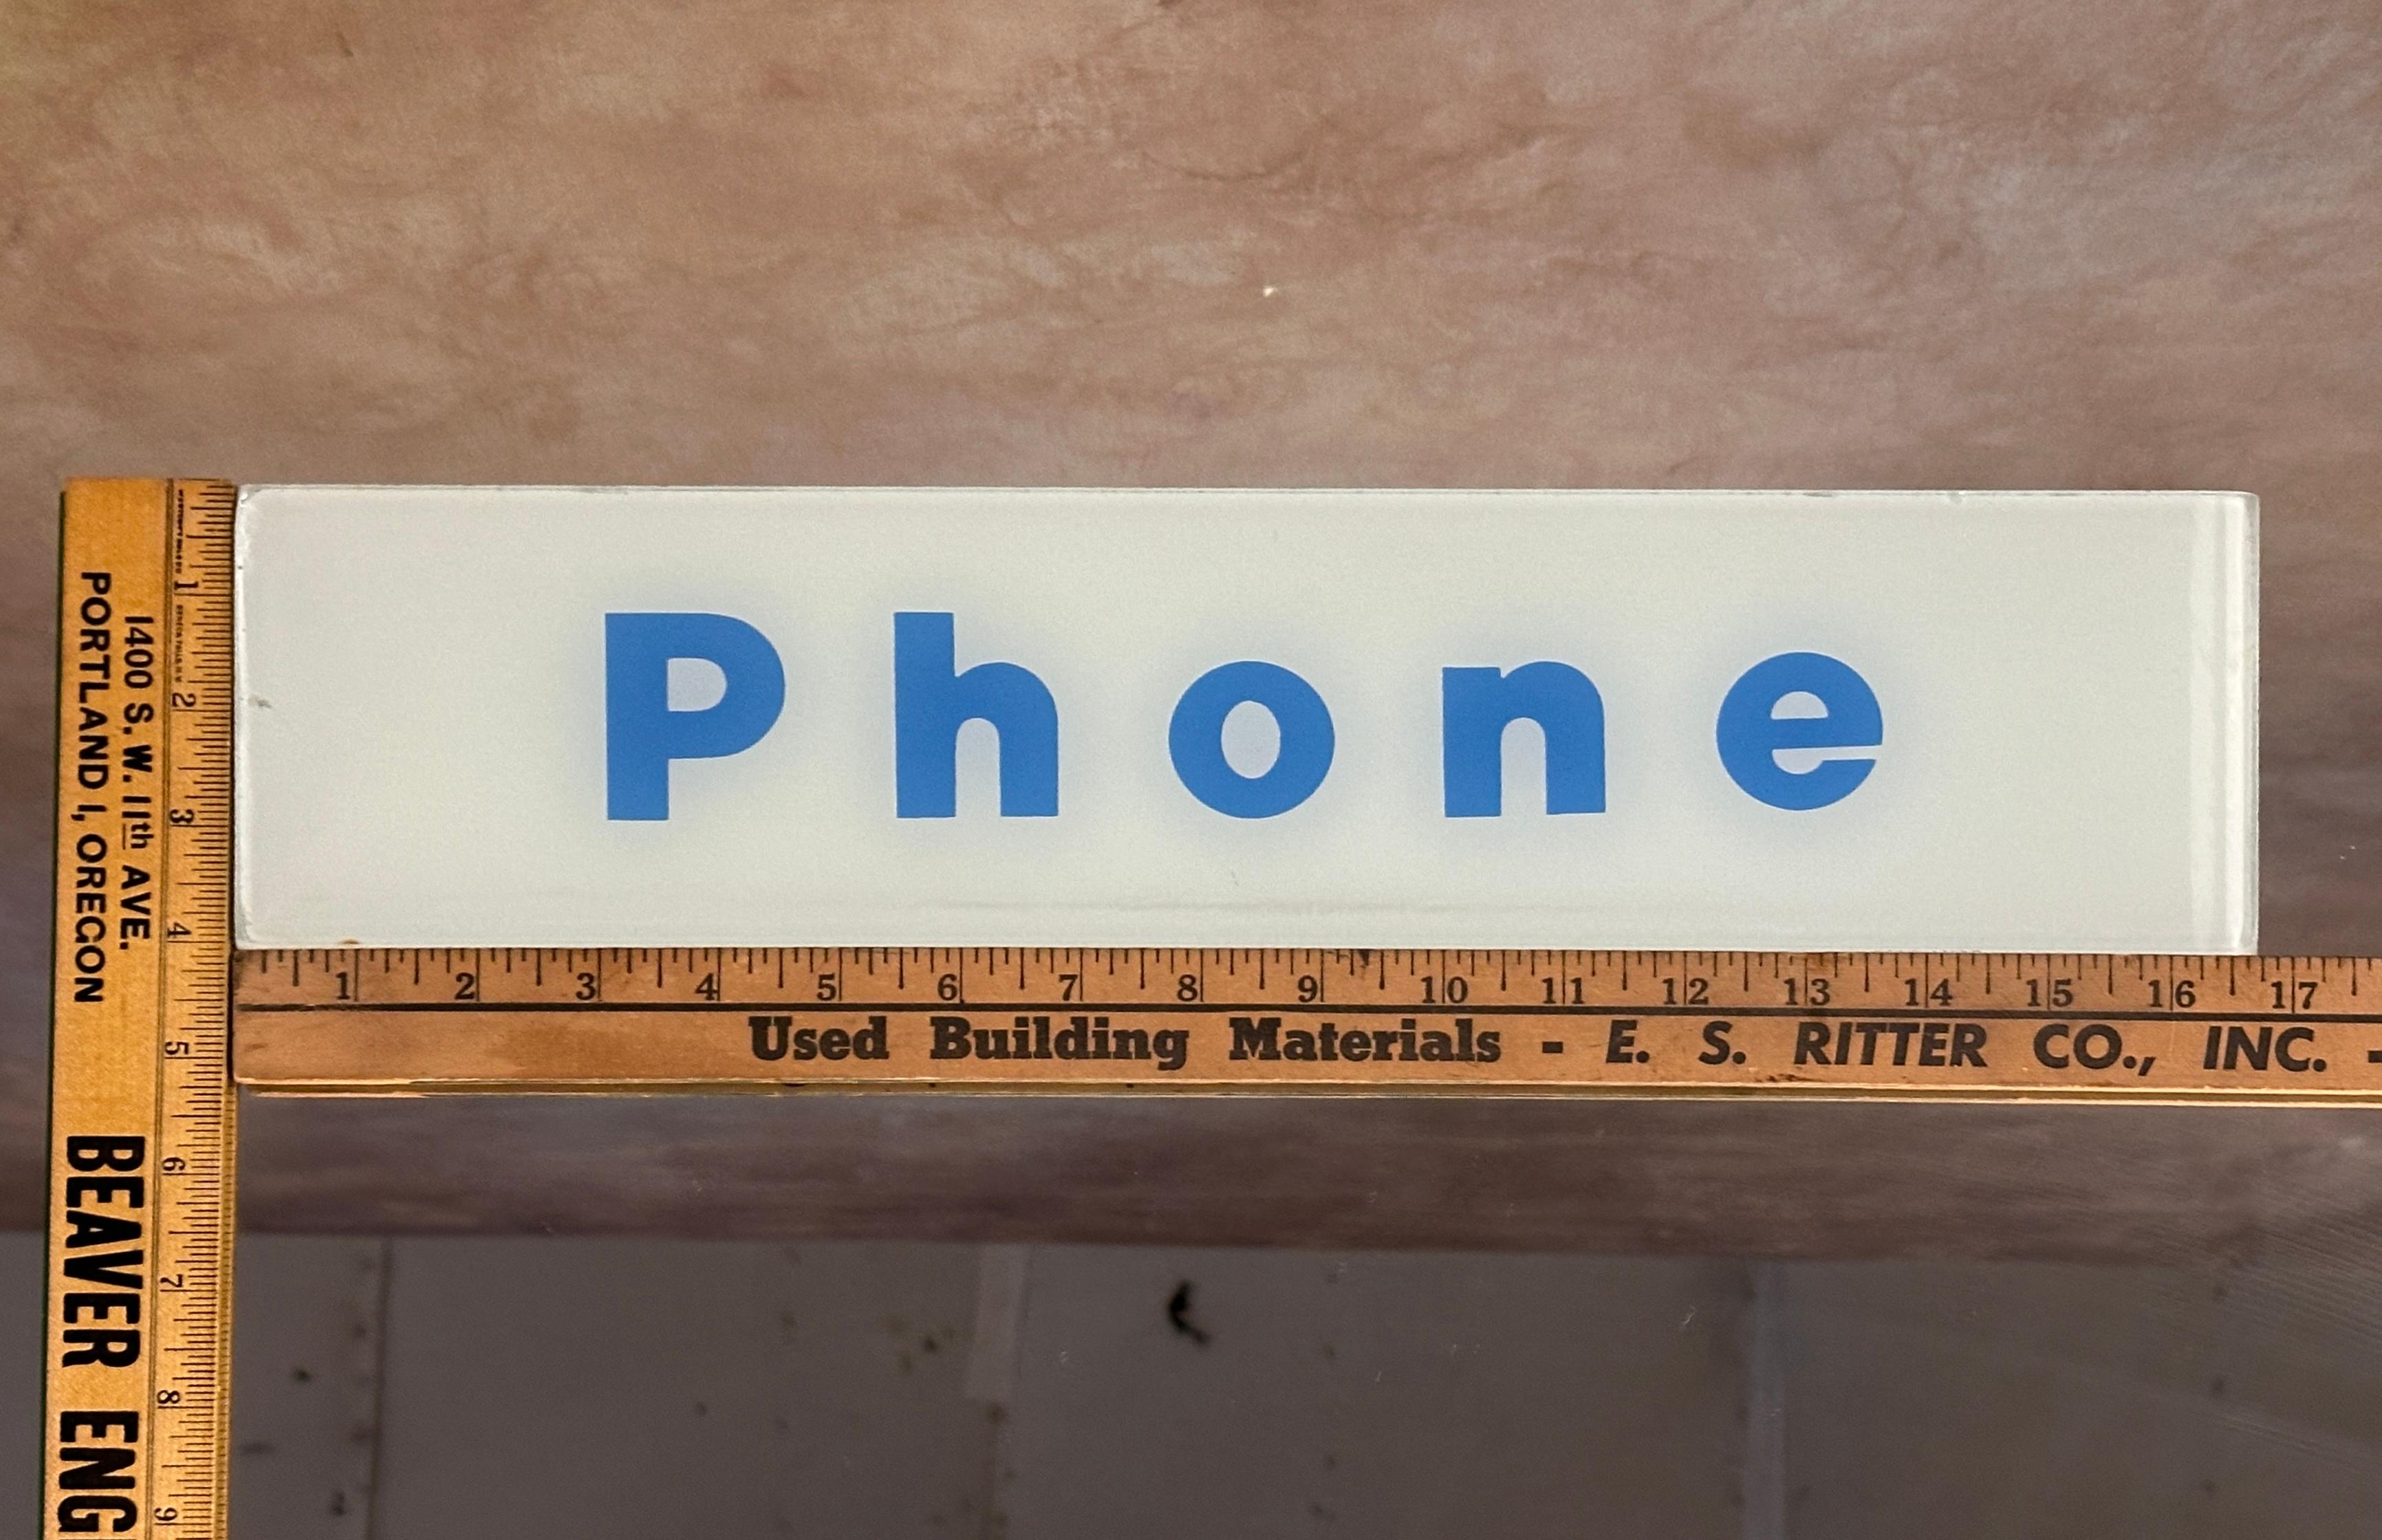 Vintage Glass Phone Booth Sign in Blue and White